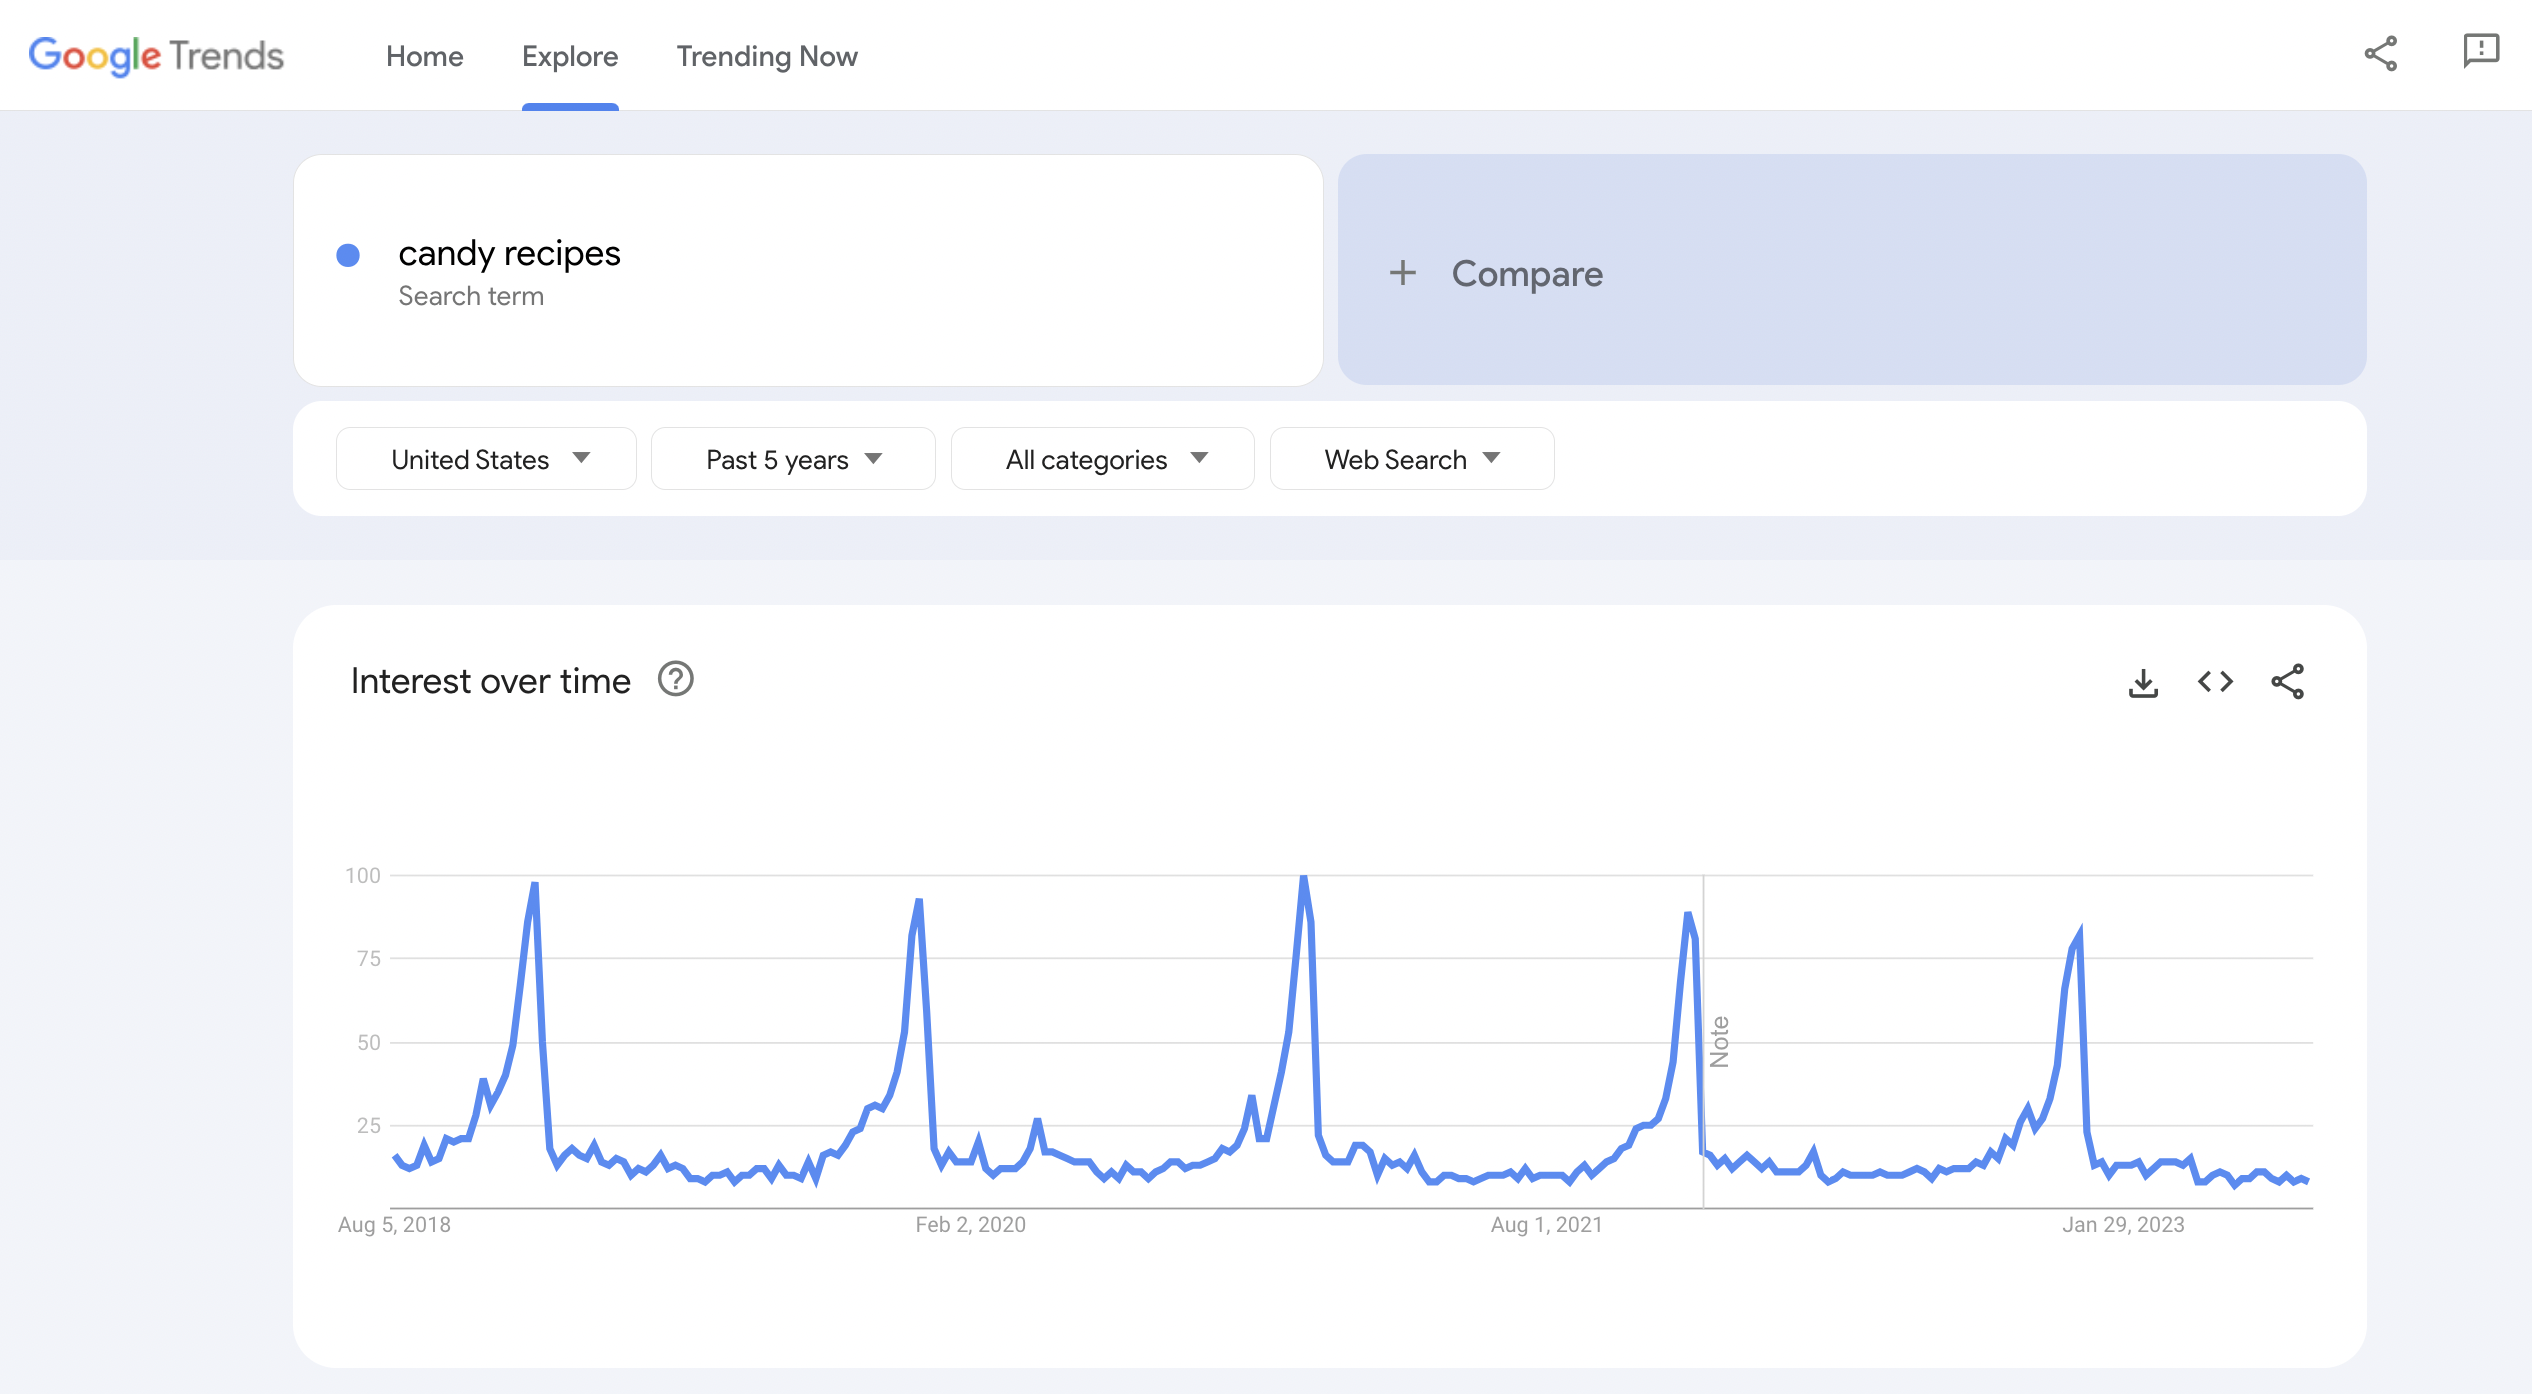 Google Trends graph for candy recipes